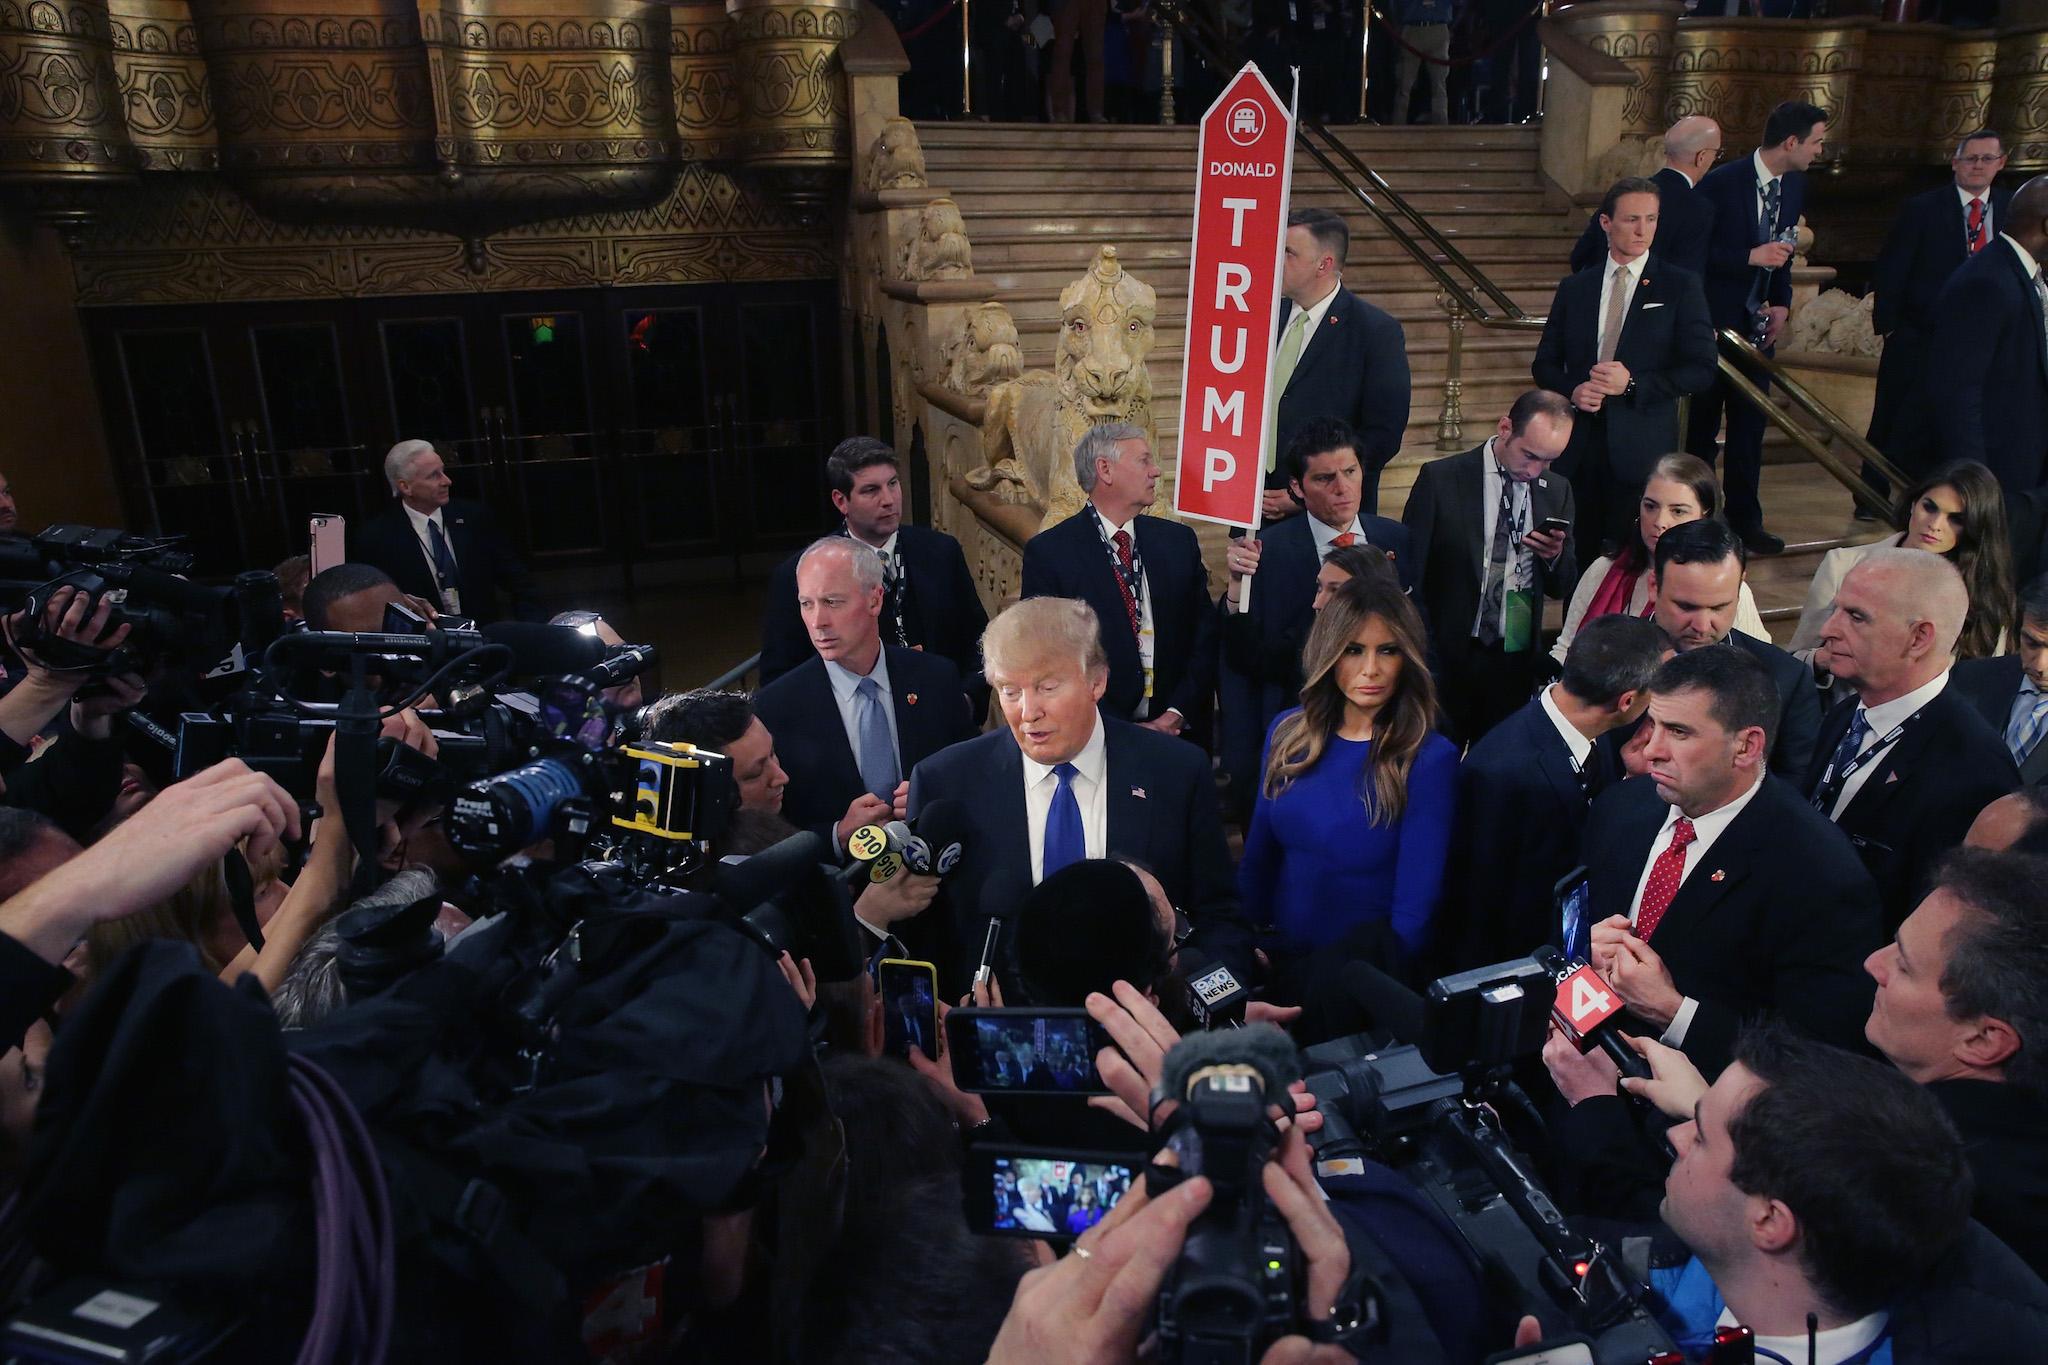 Republican presidential candidate Donald Trump greets reporters in the spin room following a debate sponsored by Fox News at the Fox Theatre on March 3, 2016 in Detroit, Michigan